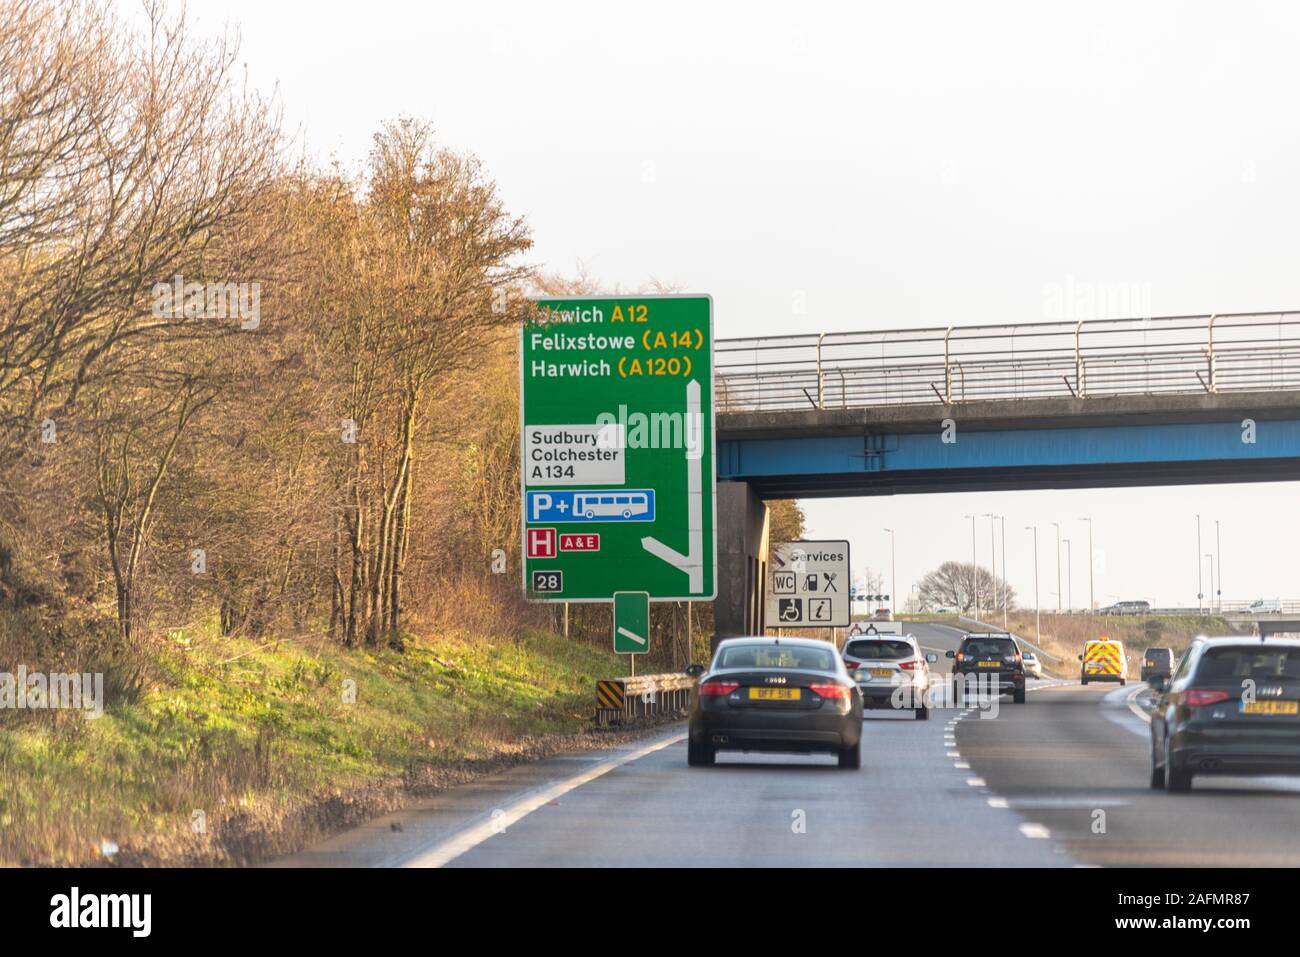 Road sign directions to Ipswich, Felixstowe, Harwich, Sudbury, Colchester with vehicles driving on a stretch of A12 duel carriageway, Essex, UK. Stock Photo